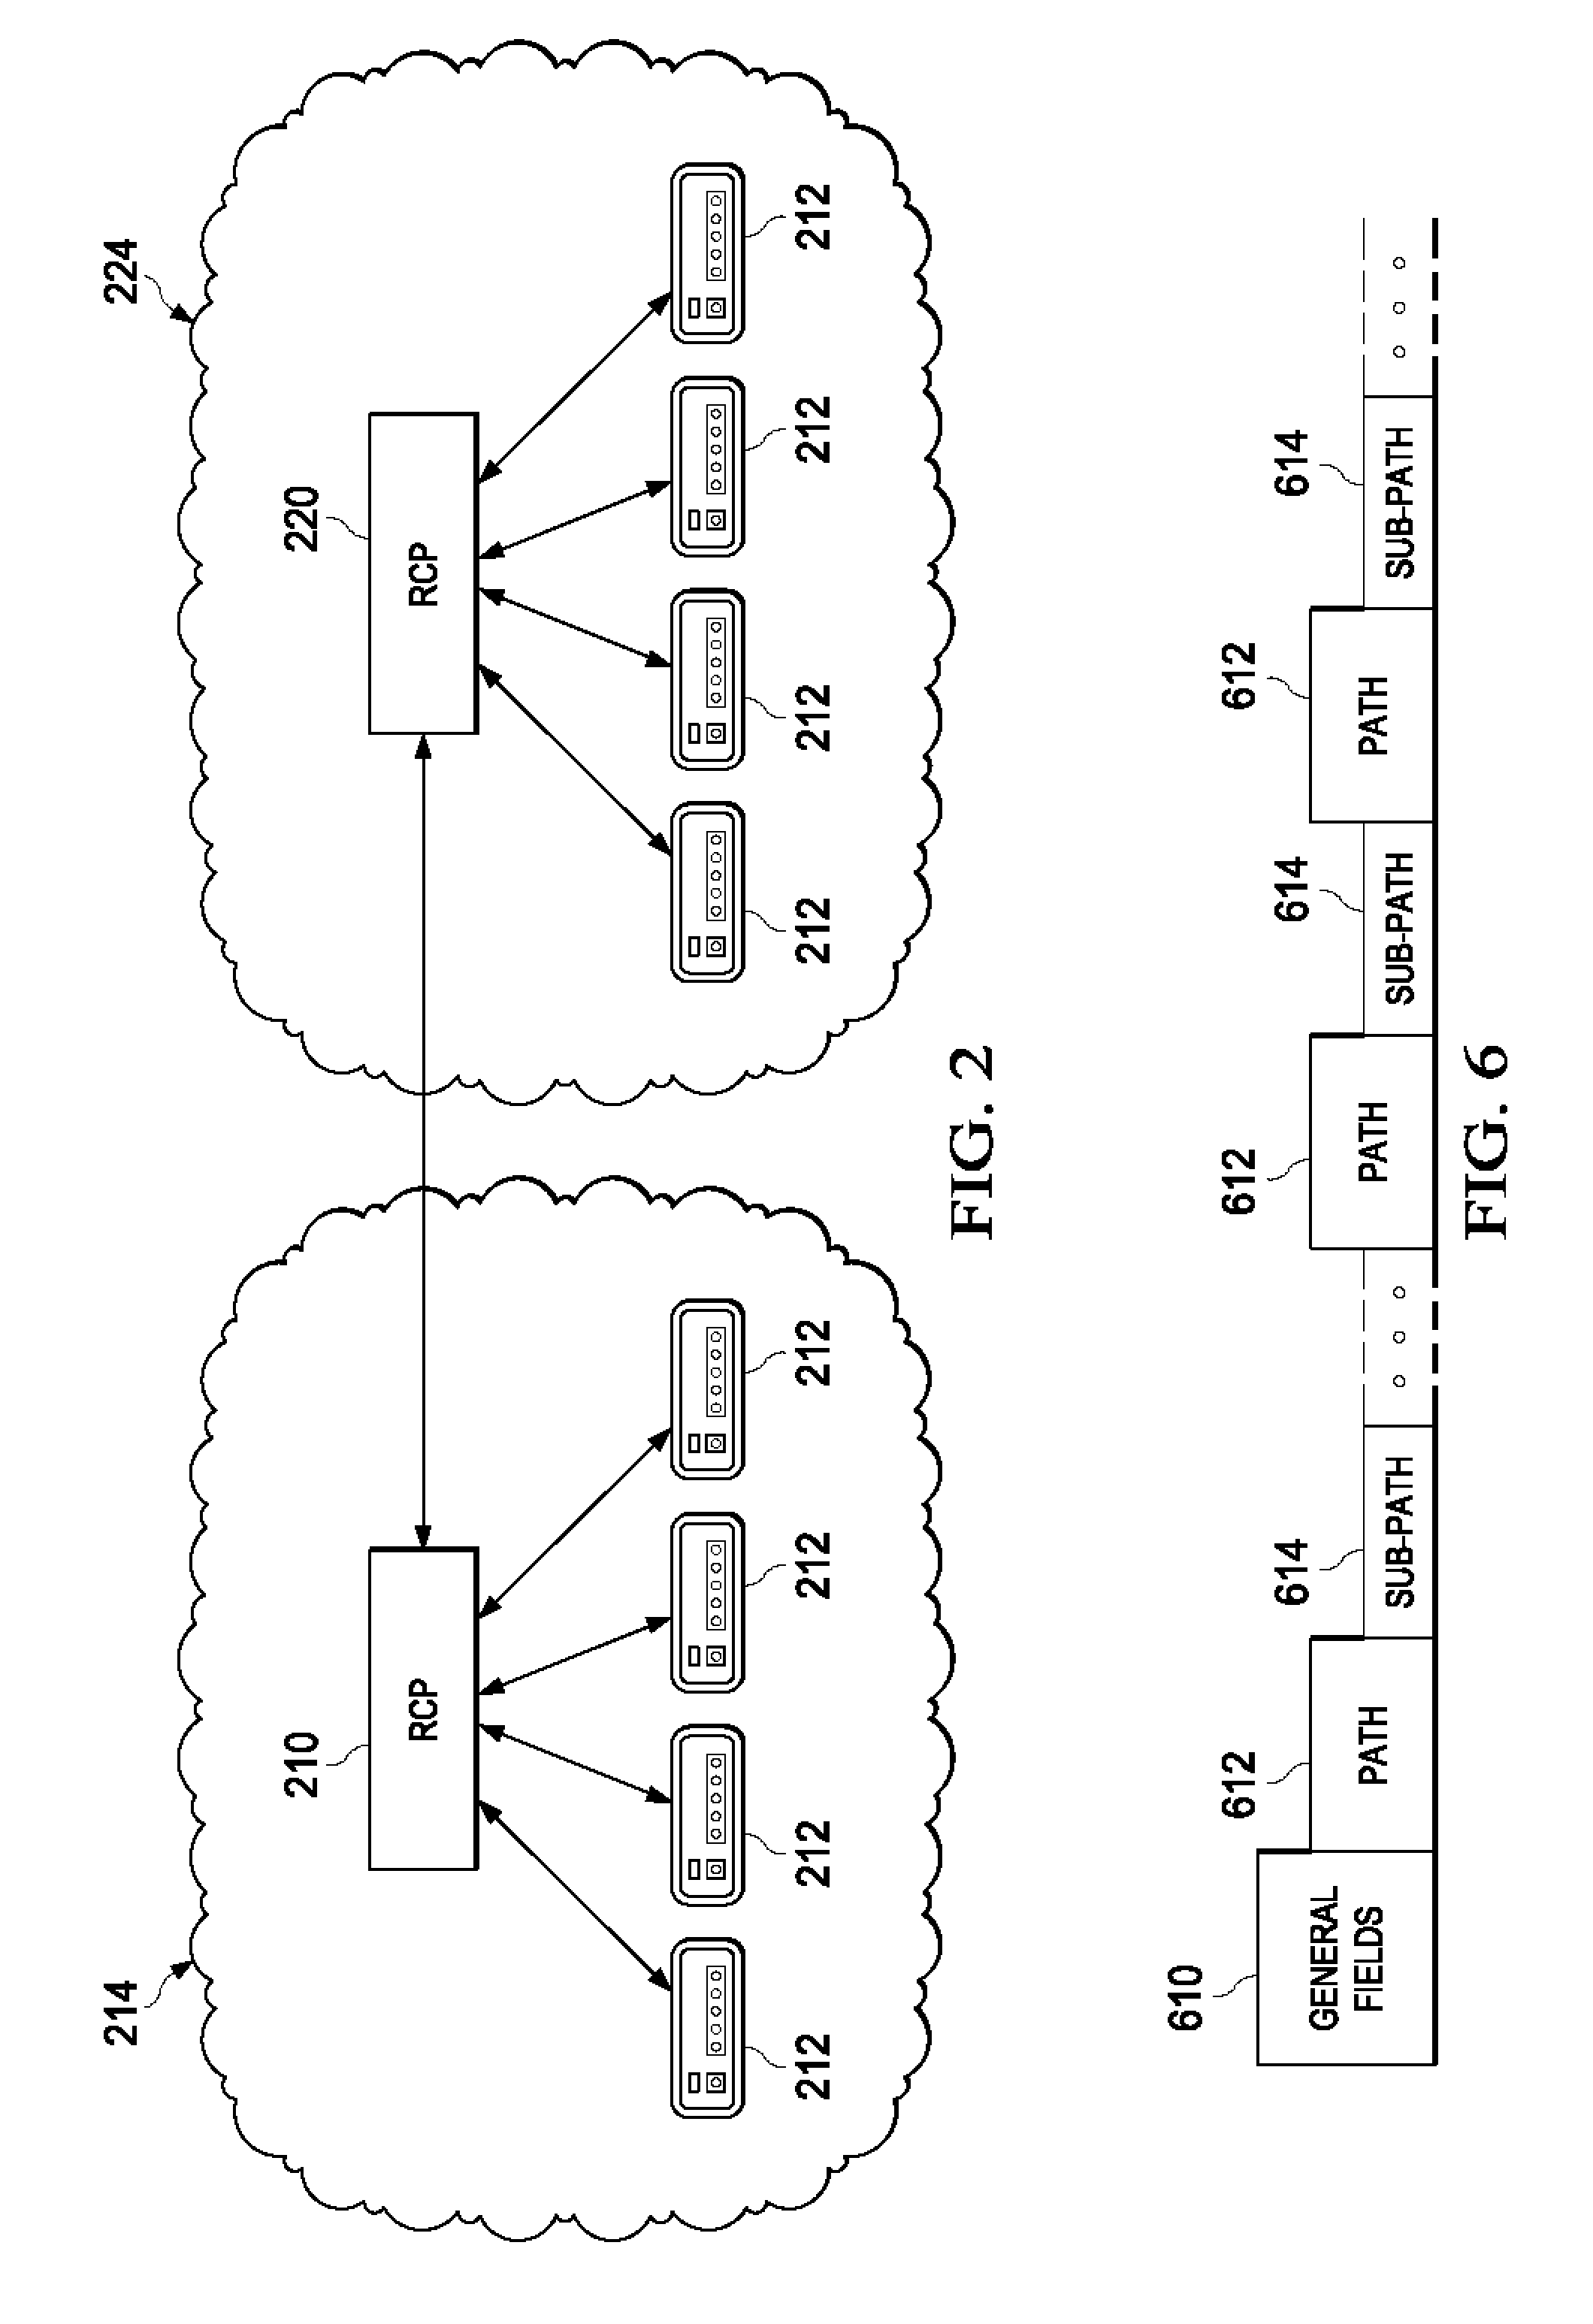 System and Method for Service Assurance in IP Networks